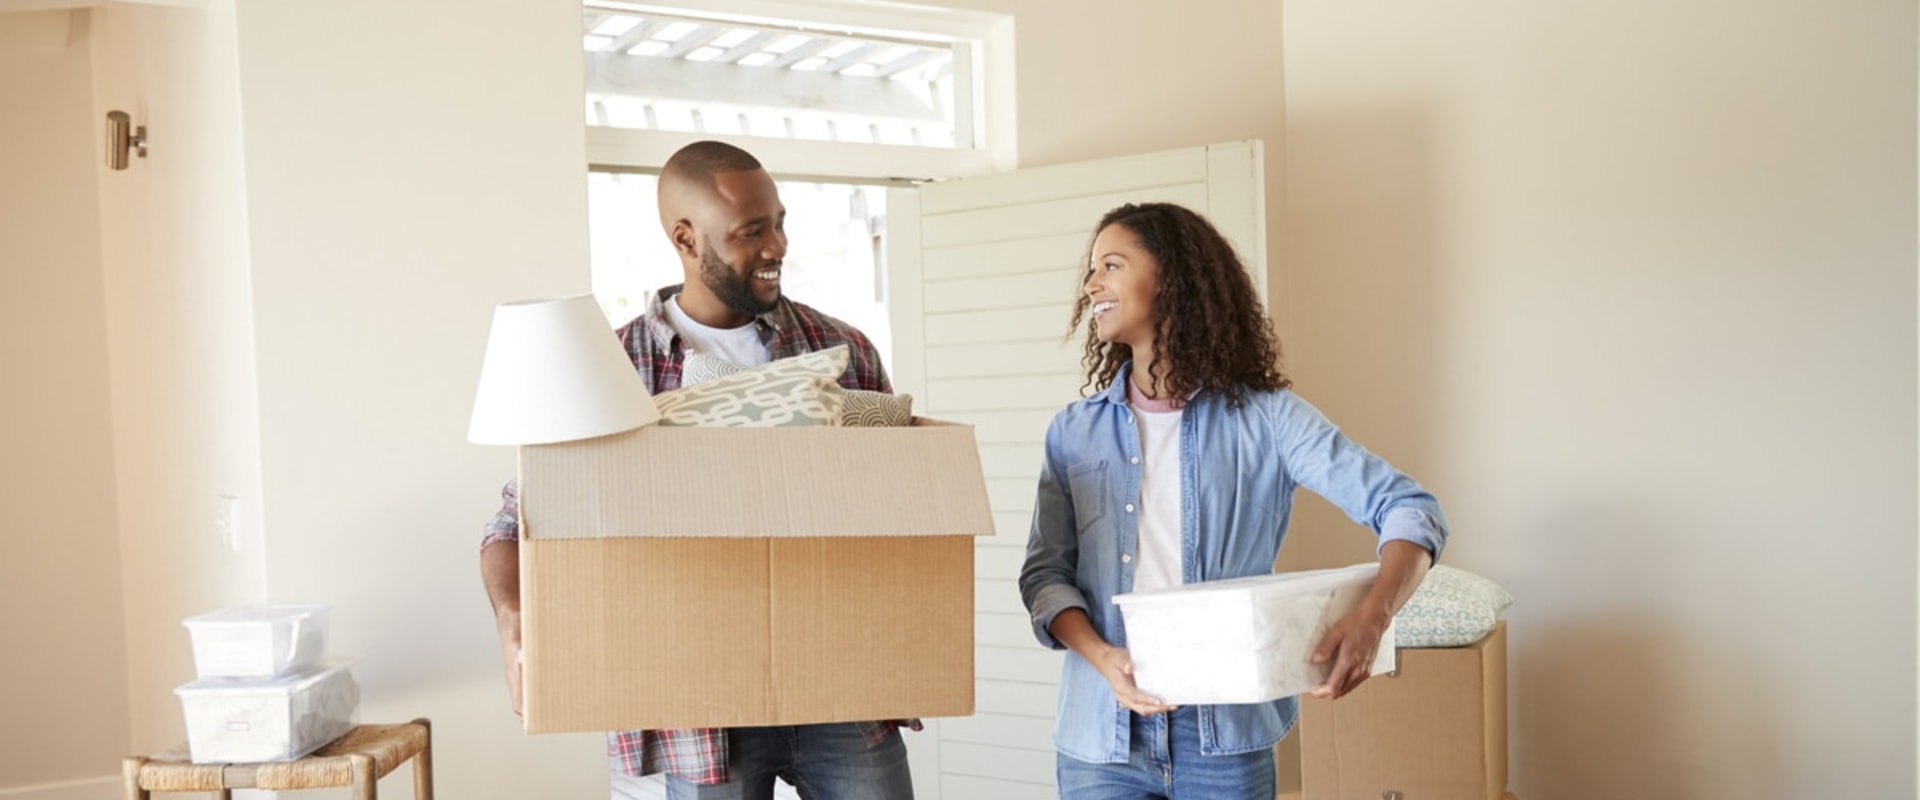 Things to Consider When Moving to a New Home